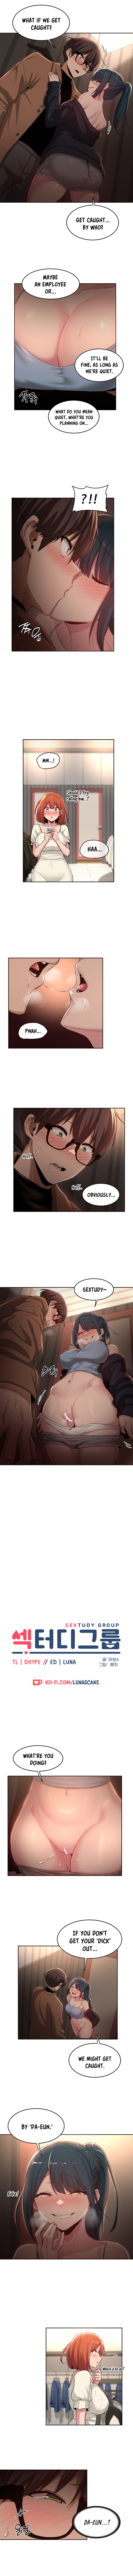 Panel Image 1 for chapter 30 of manhwa Sex Study Group on read.oppai.stream